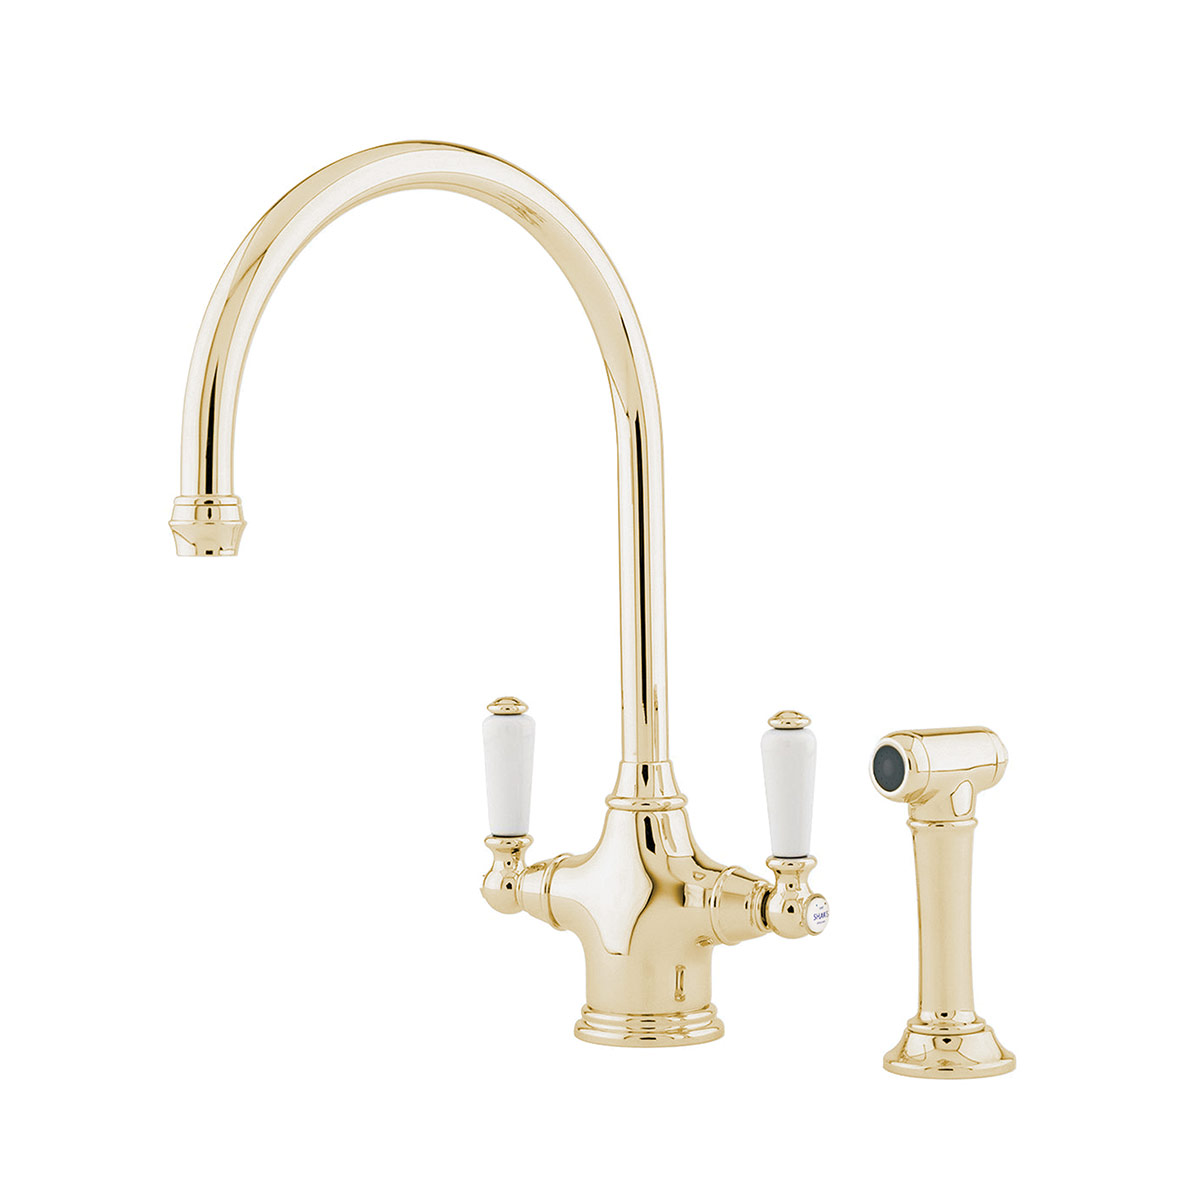 Shaws by Perrin & Rowe Ribble kitchen mixer with spray rinse in Gold (special order). Phoenician style monobloc kitchen tap AUSH.4360. Distributed in Australia by Luxe by Design, Brisbane.